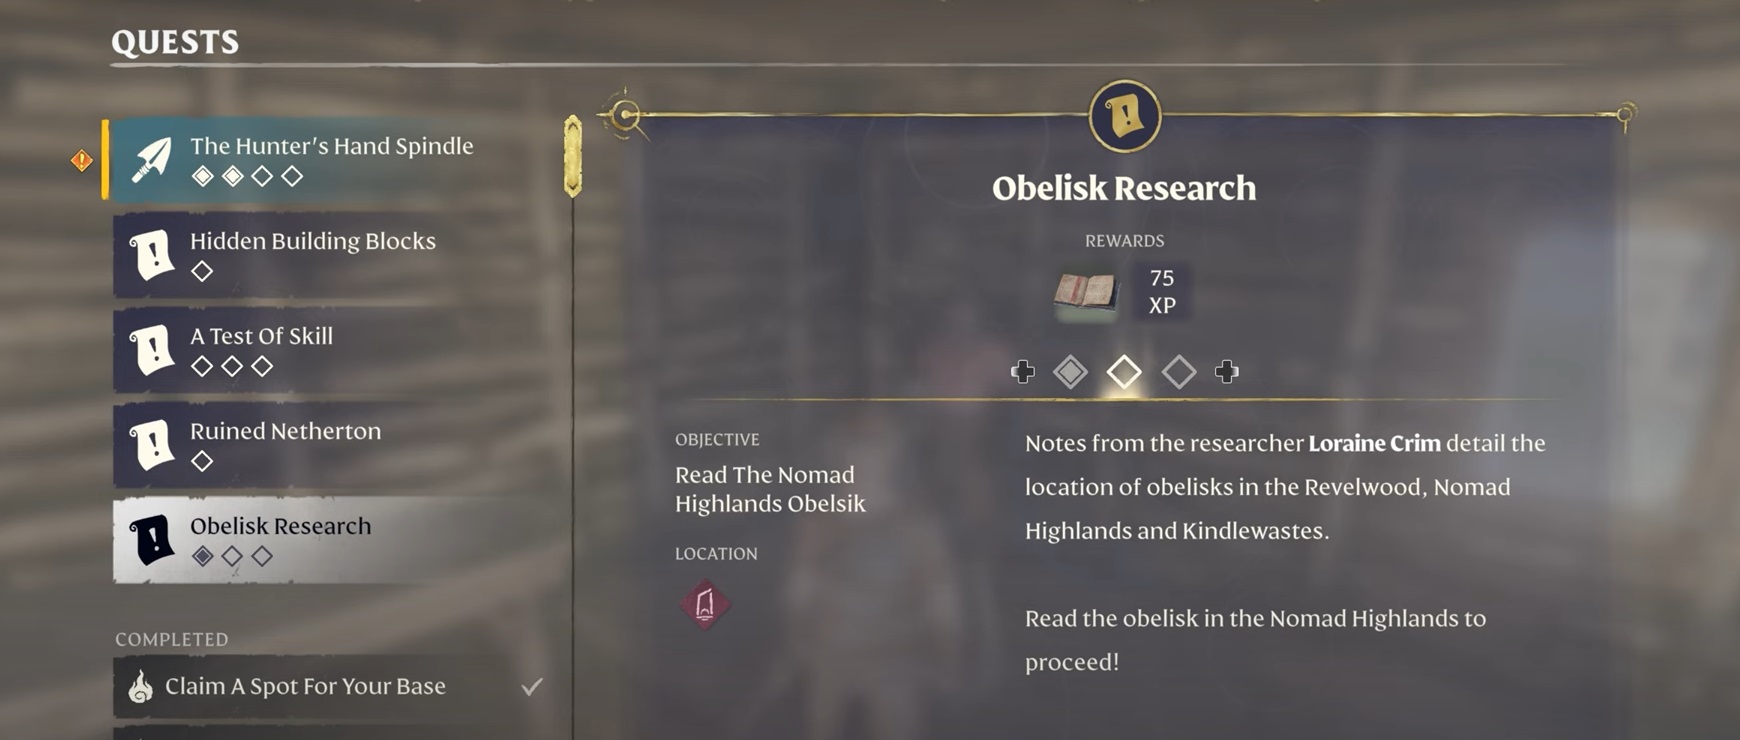 Quests in Enshrouded